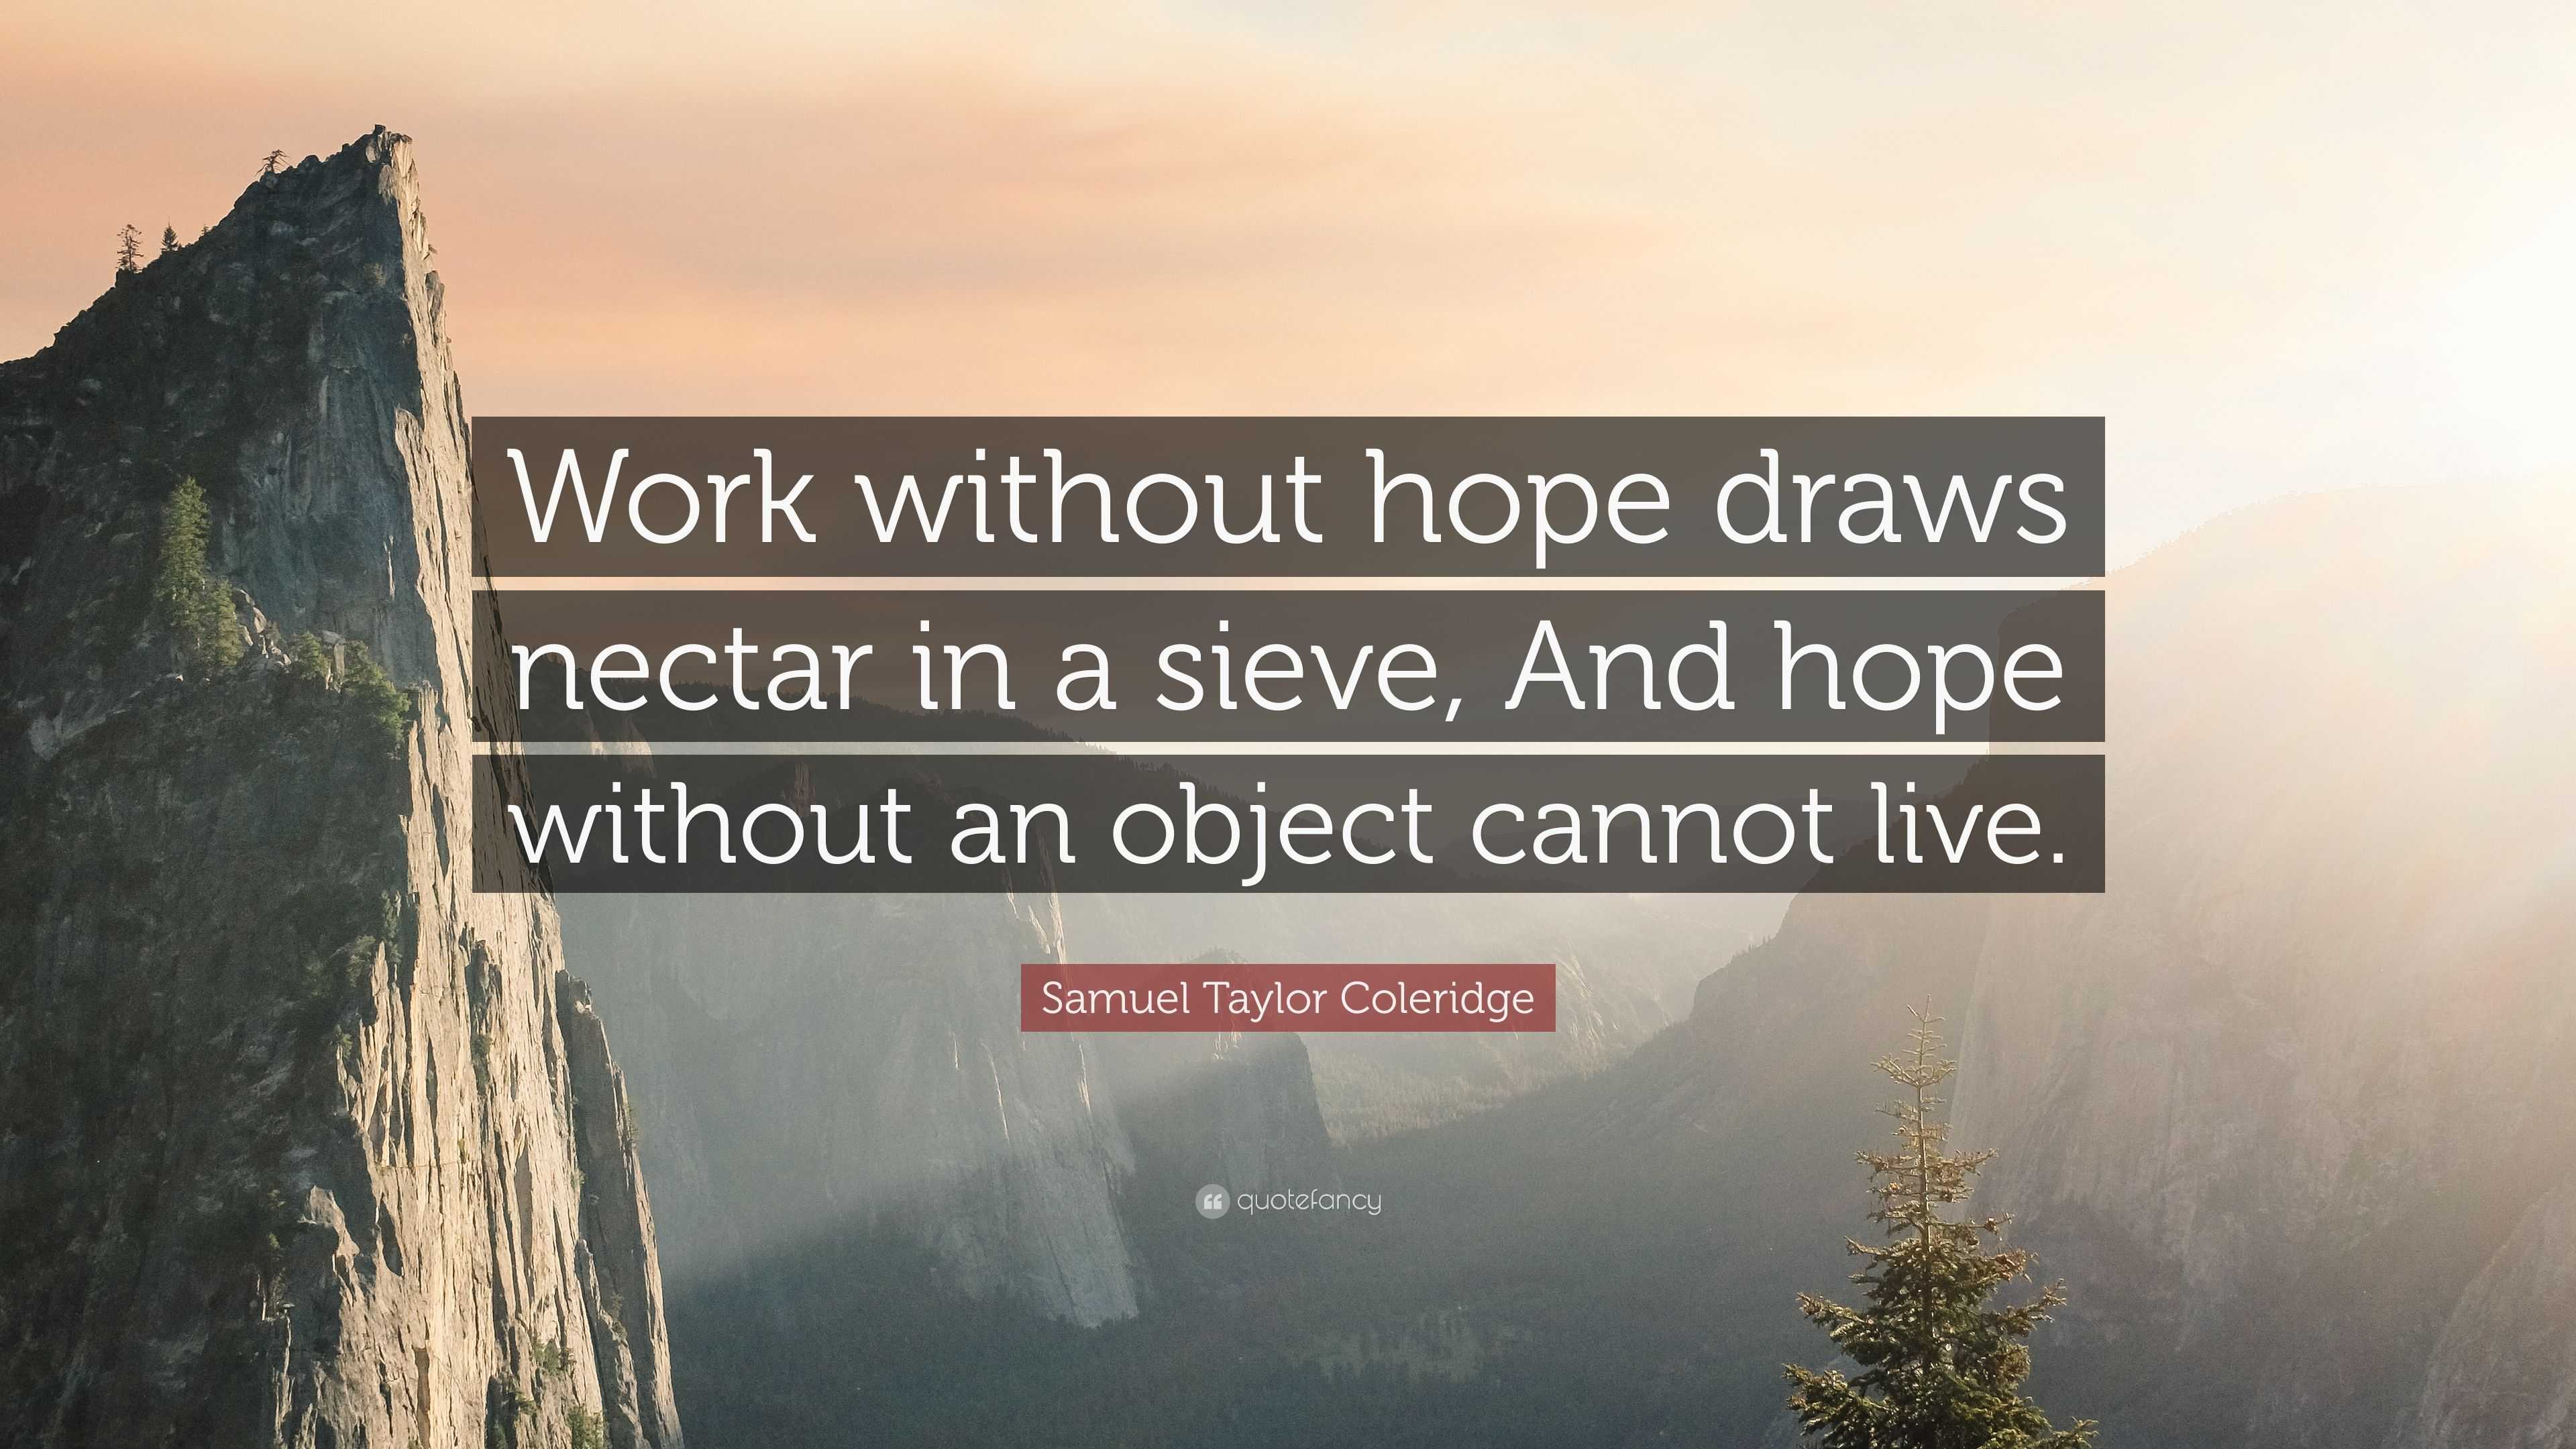 Samuel Taylor Coleridge Quote Work Without Hope Draws Nectar In A Sieve And Hope Without An